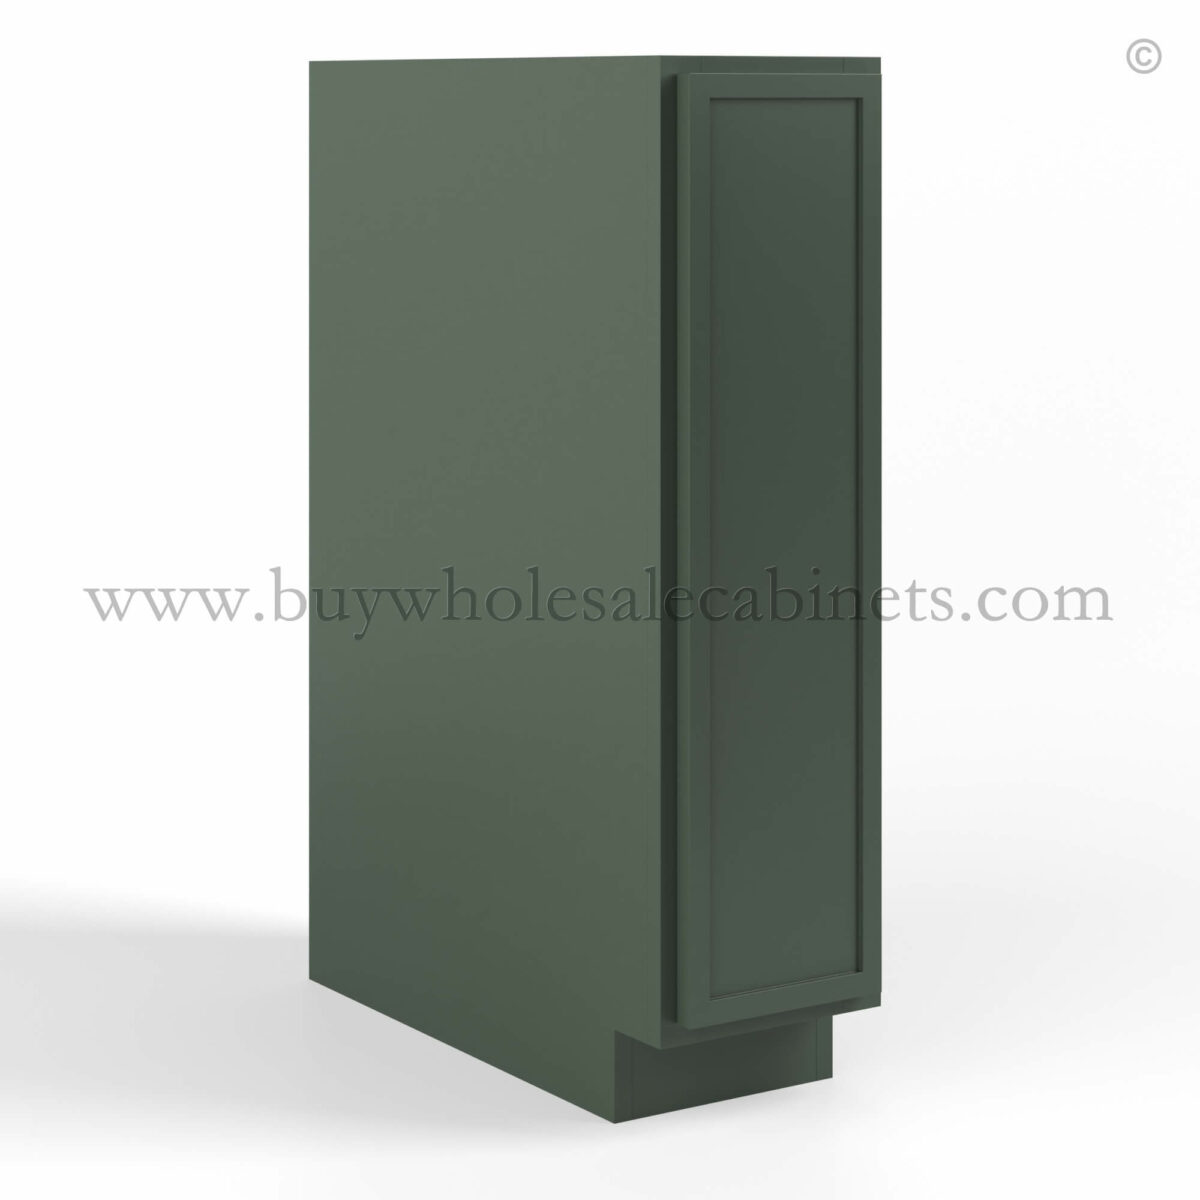 green cabinets